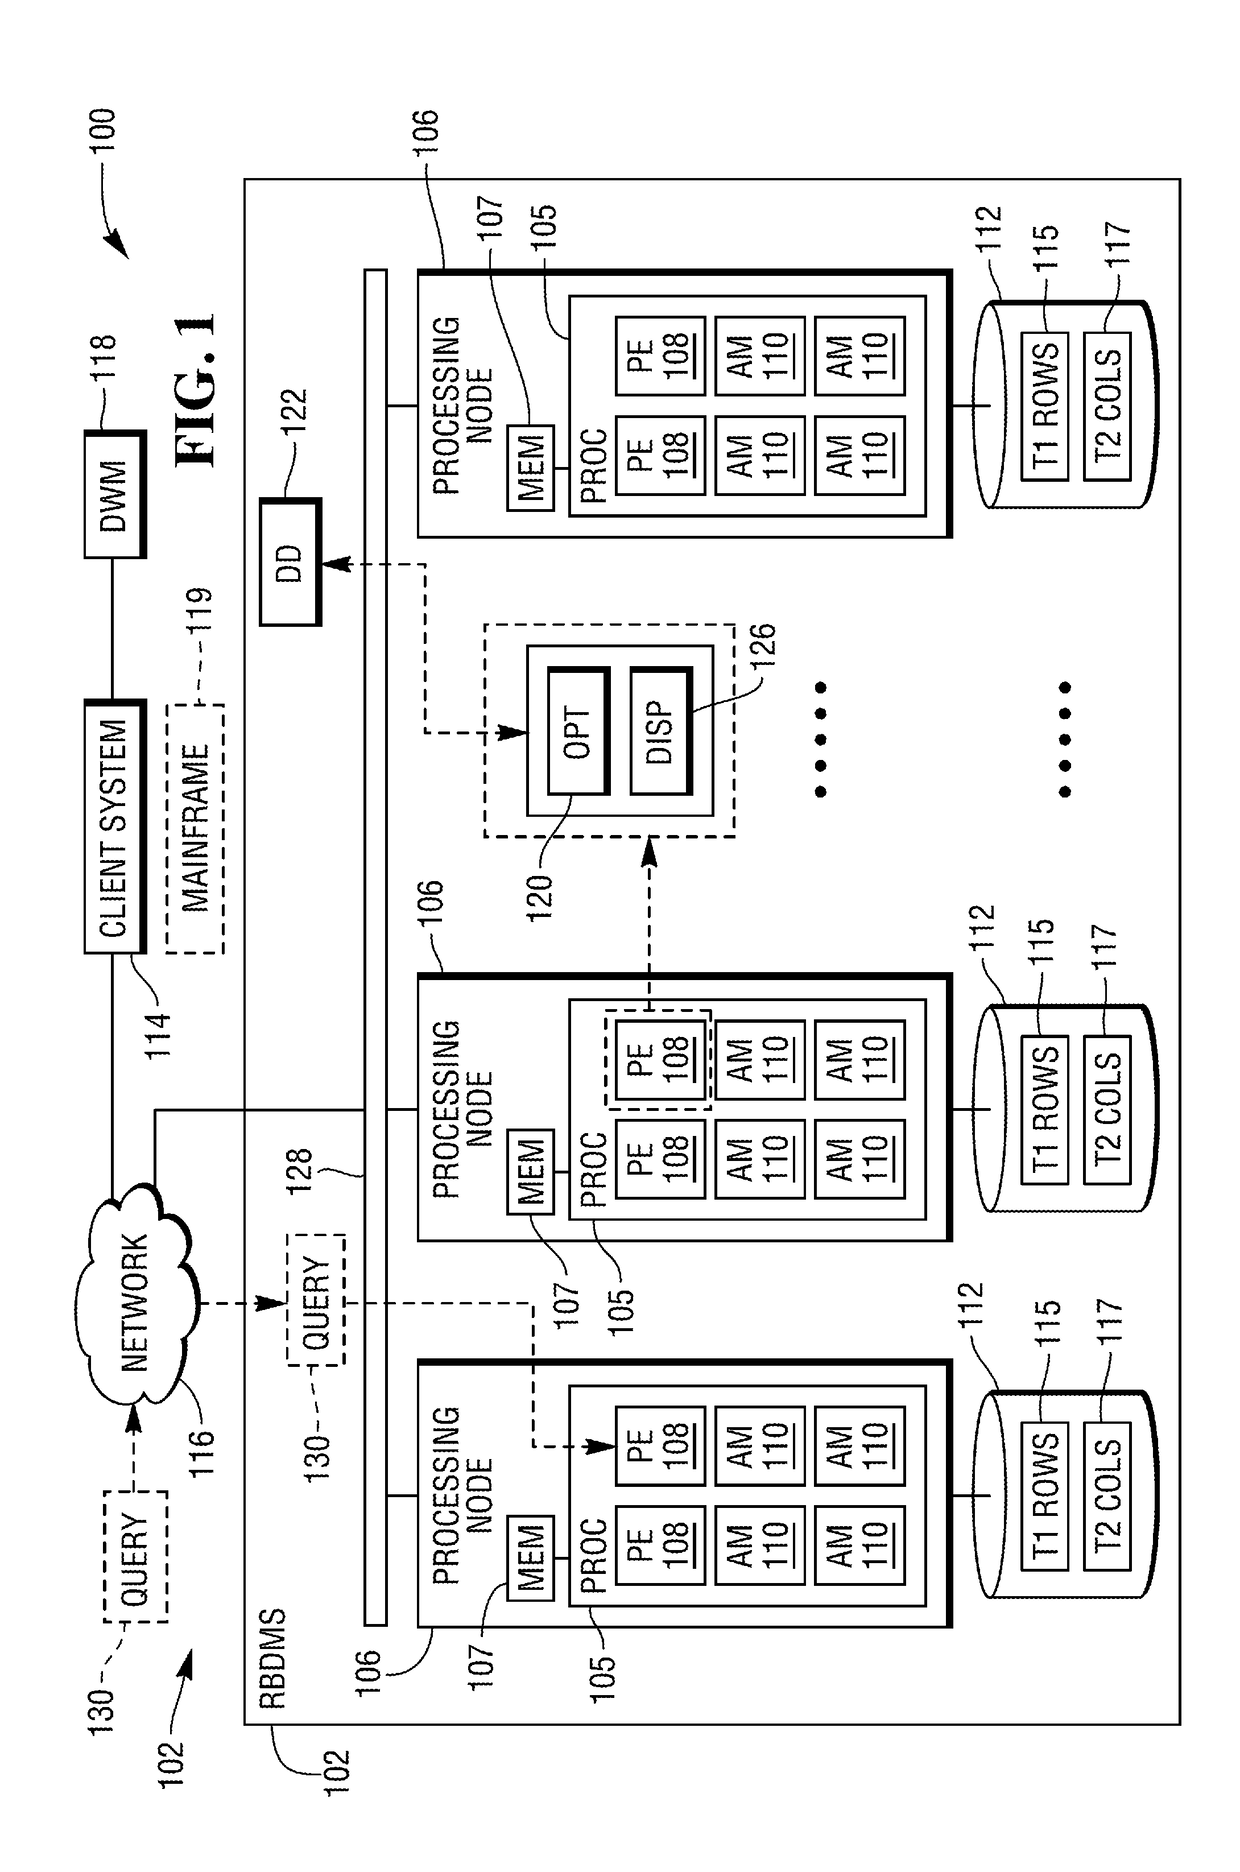 Skew detection and handling in a parallel processing relational database system